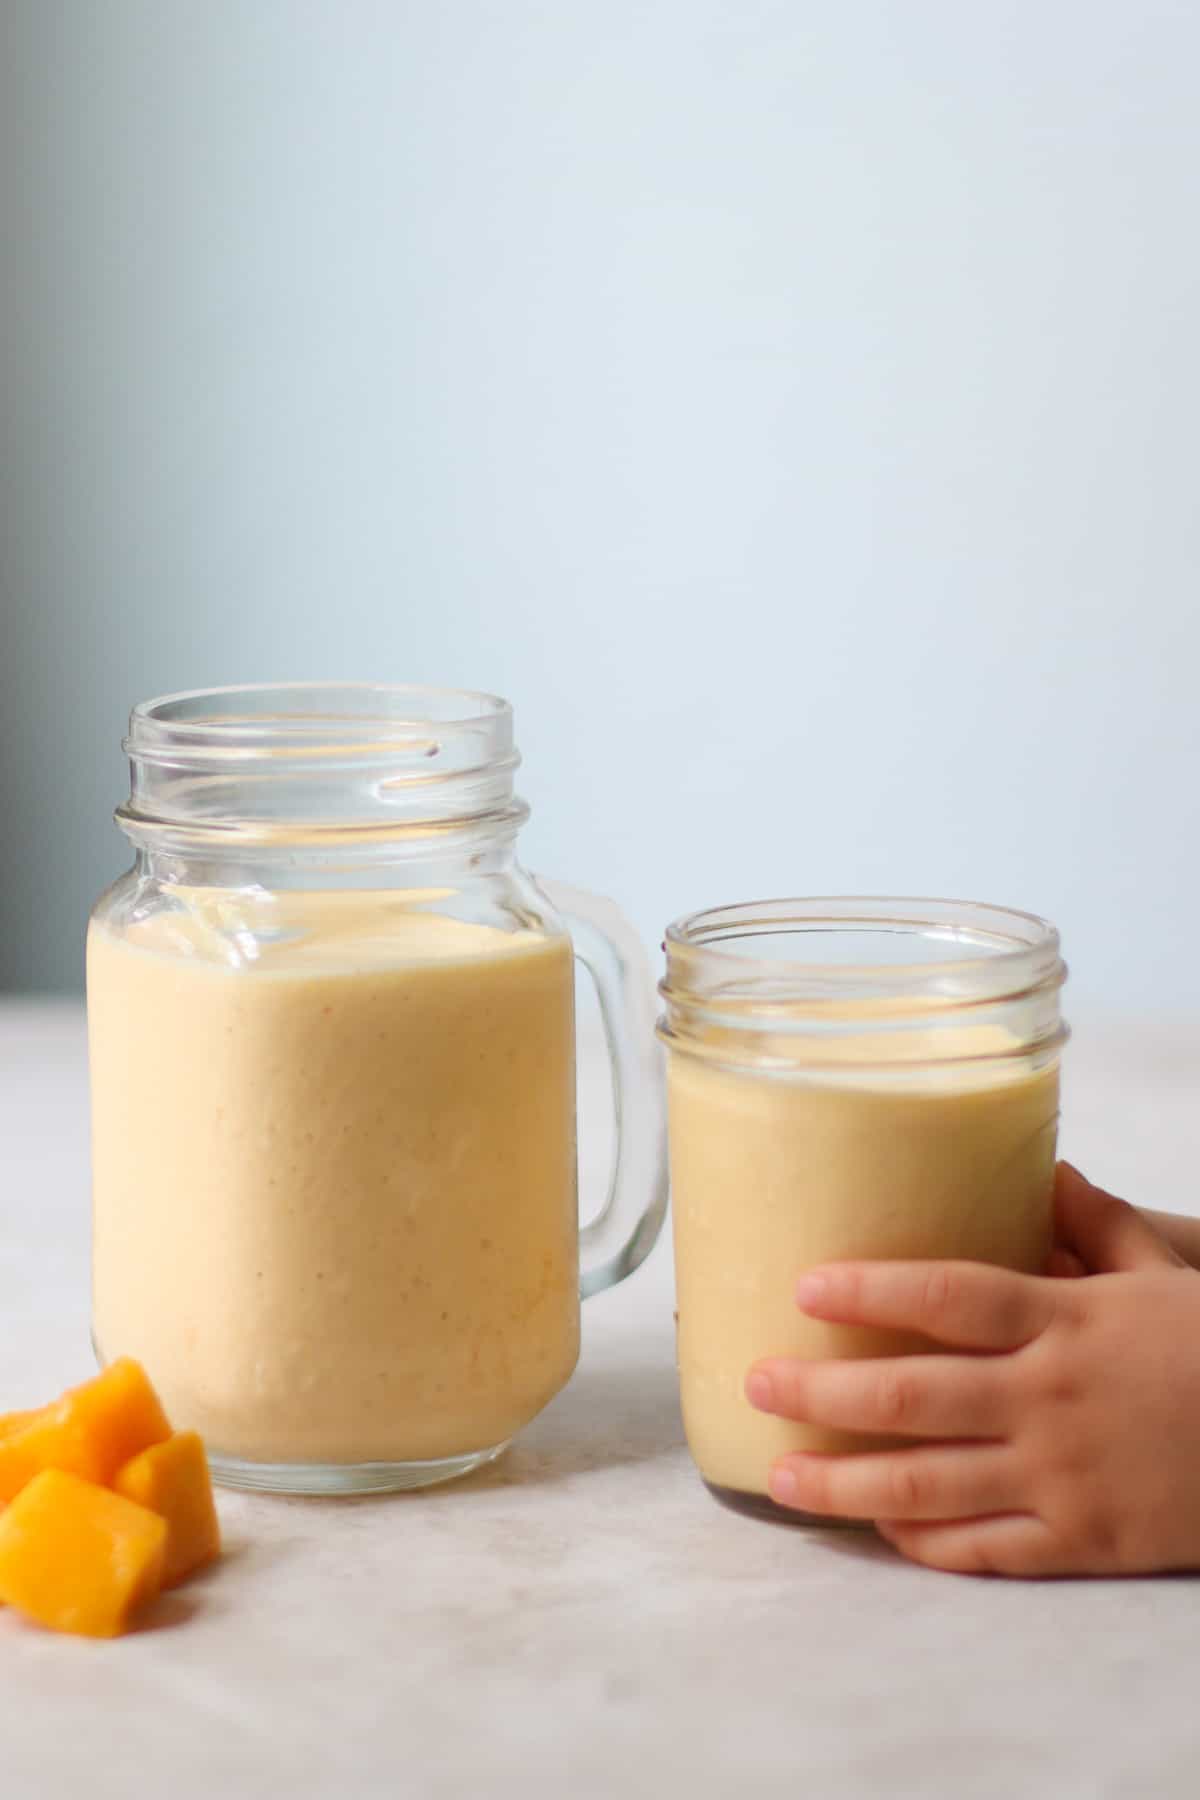 Shake in a large and small glass jars with toddler's hand wrapped around one.